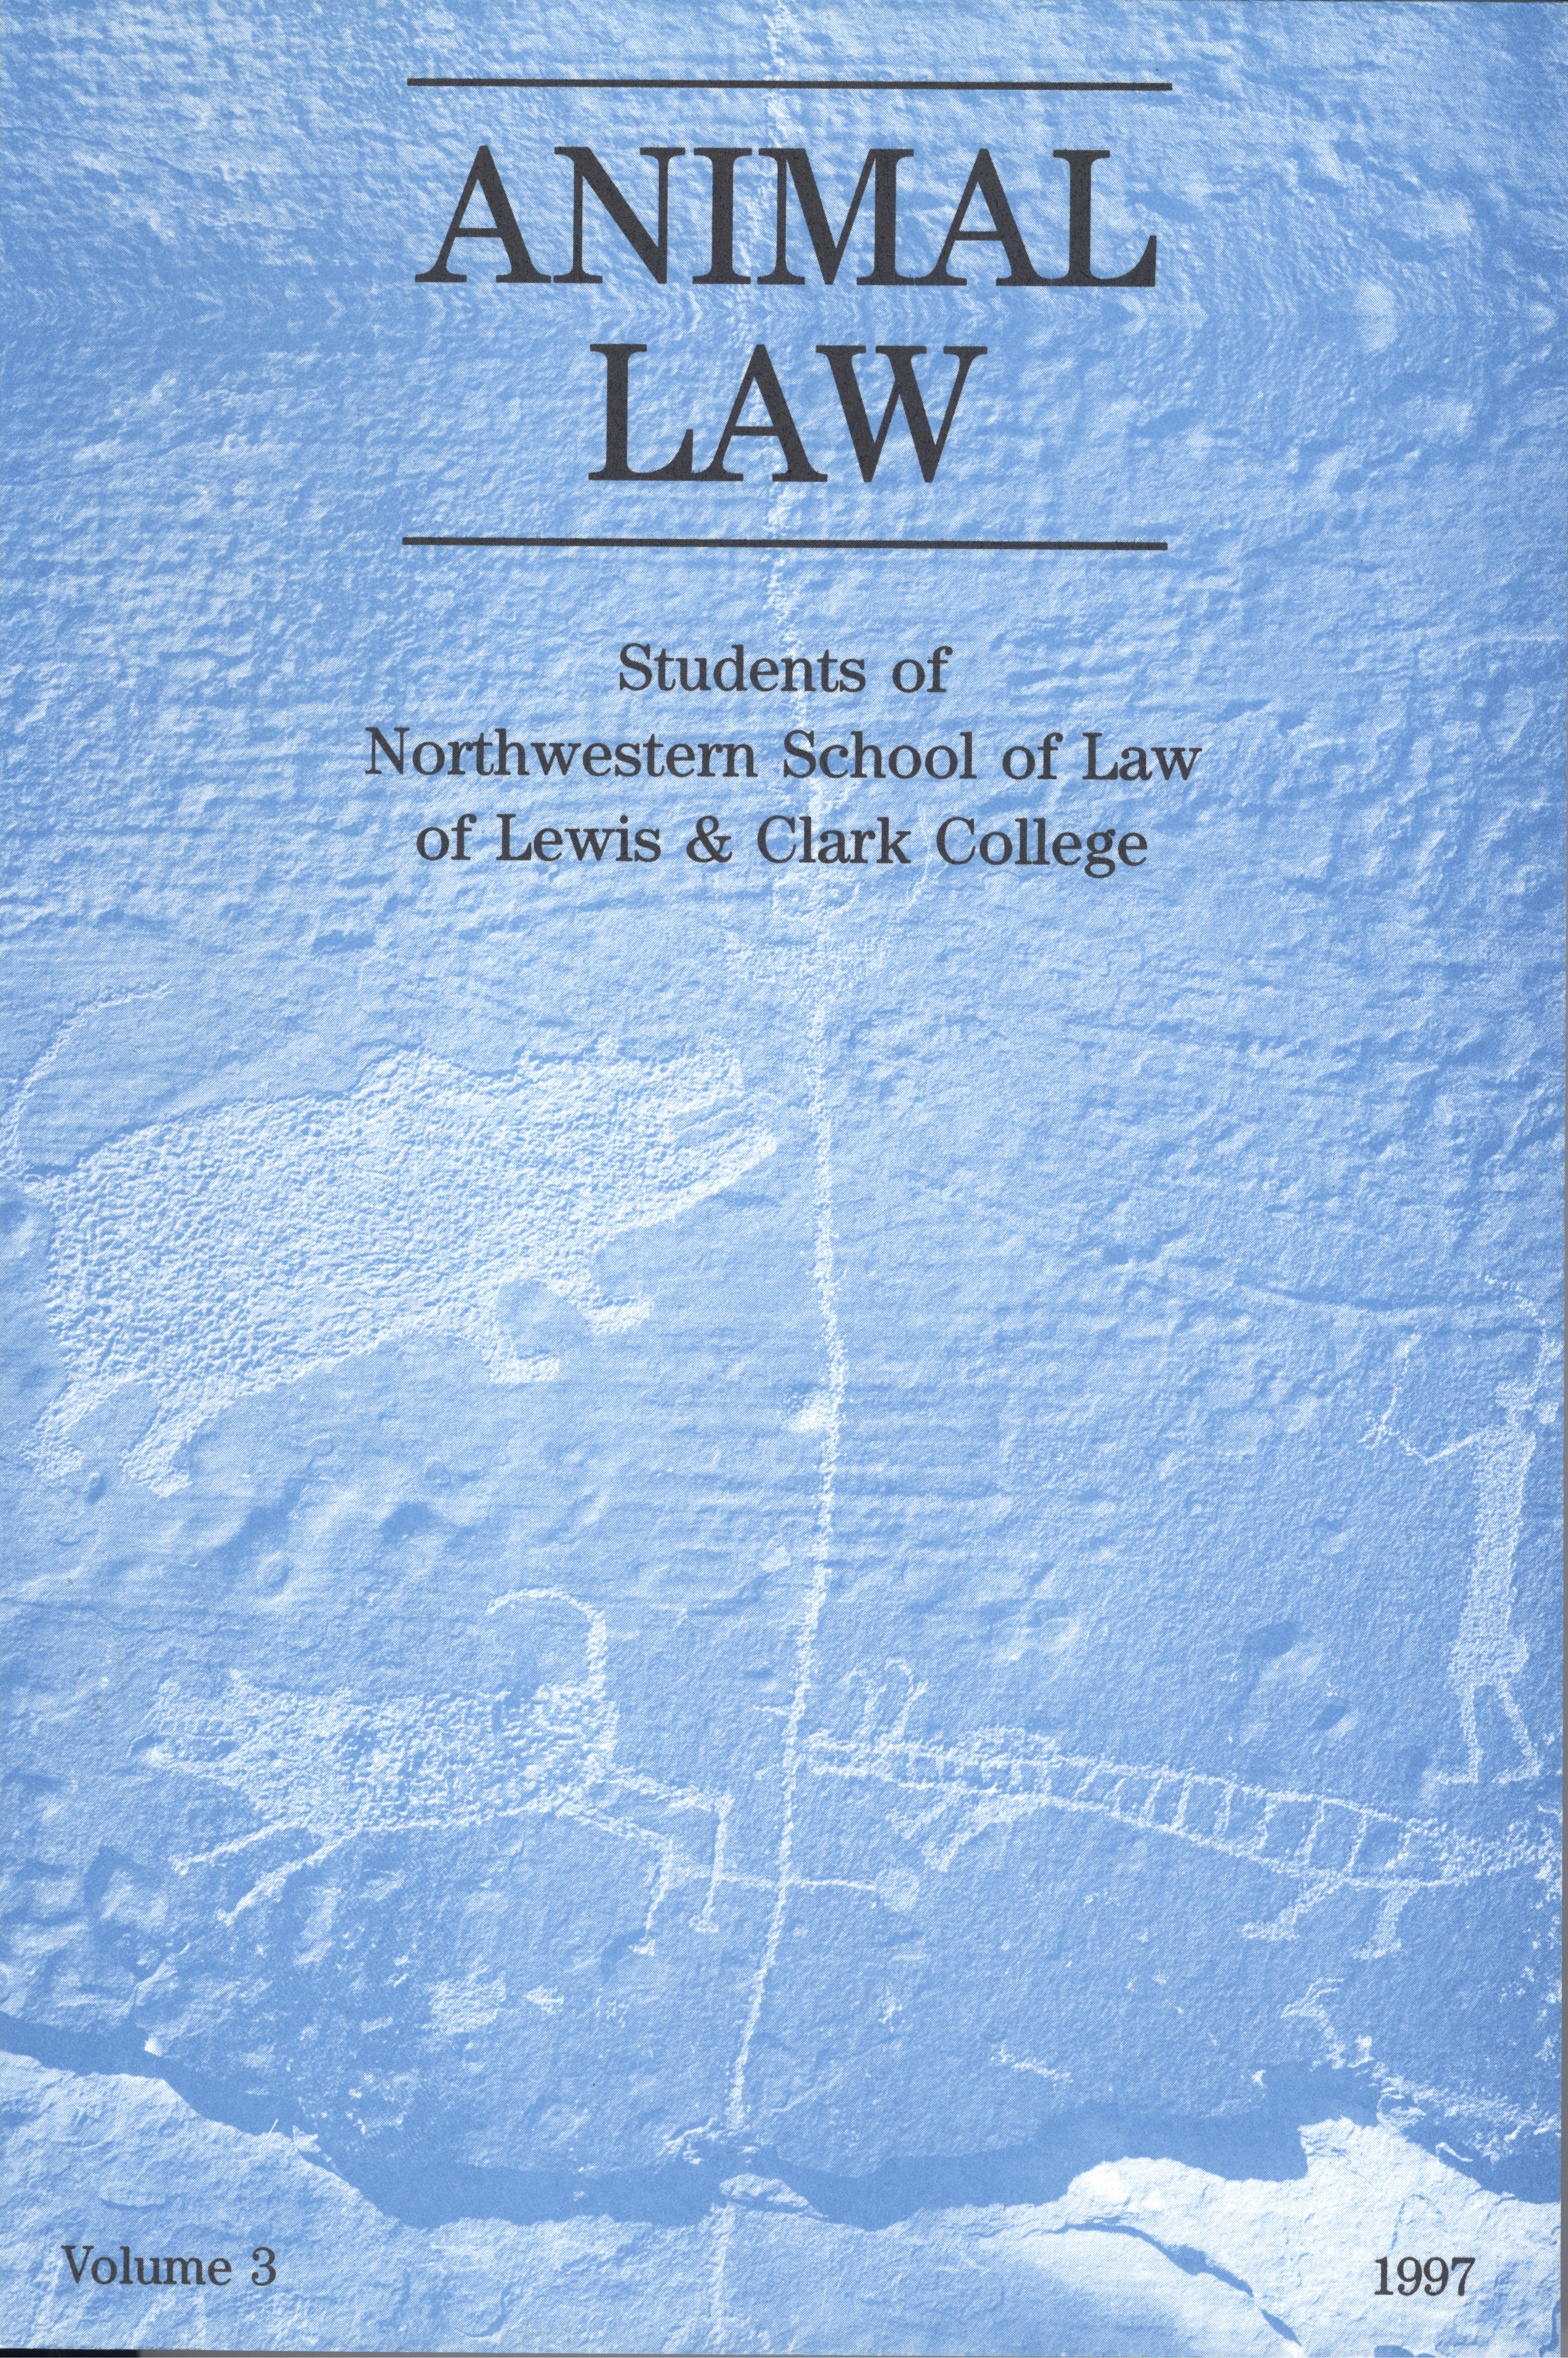 Cover of Animal Law Review Volume 3, Issue 1, 1997